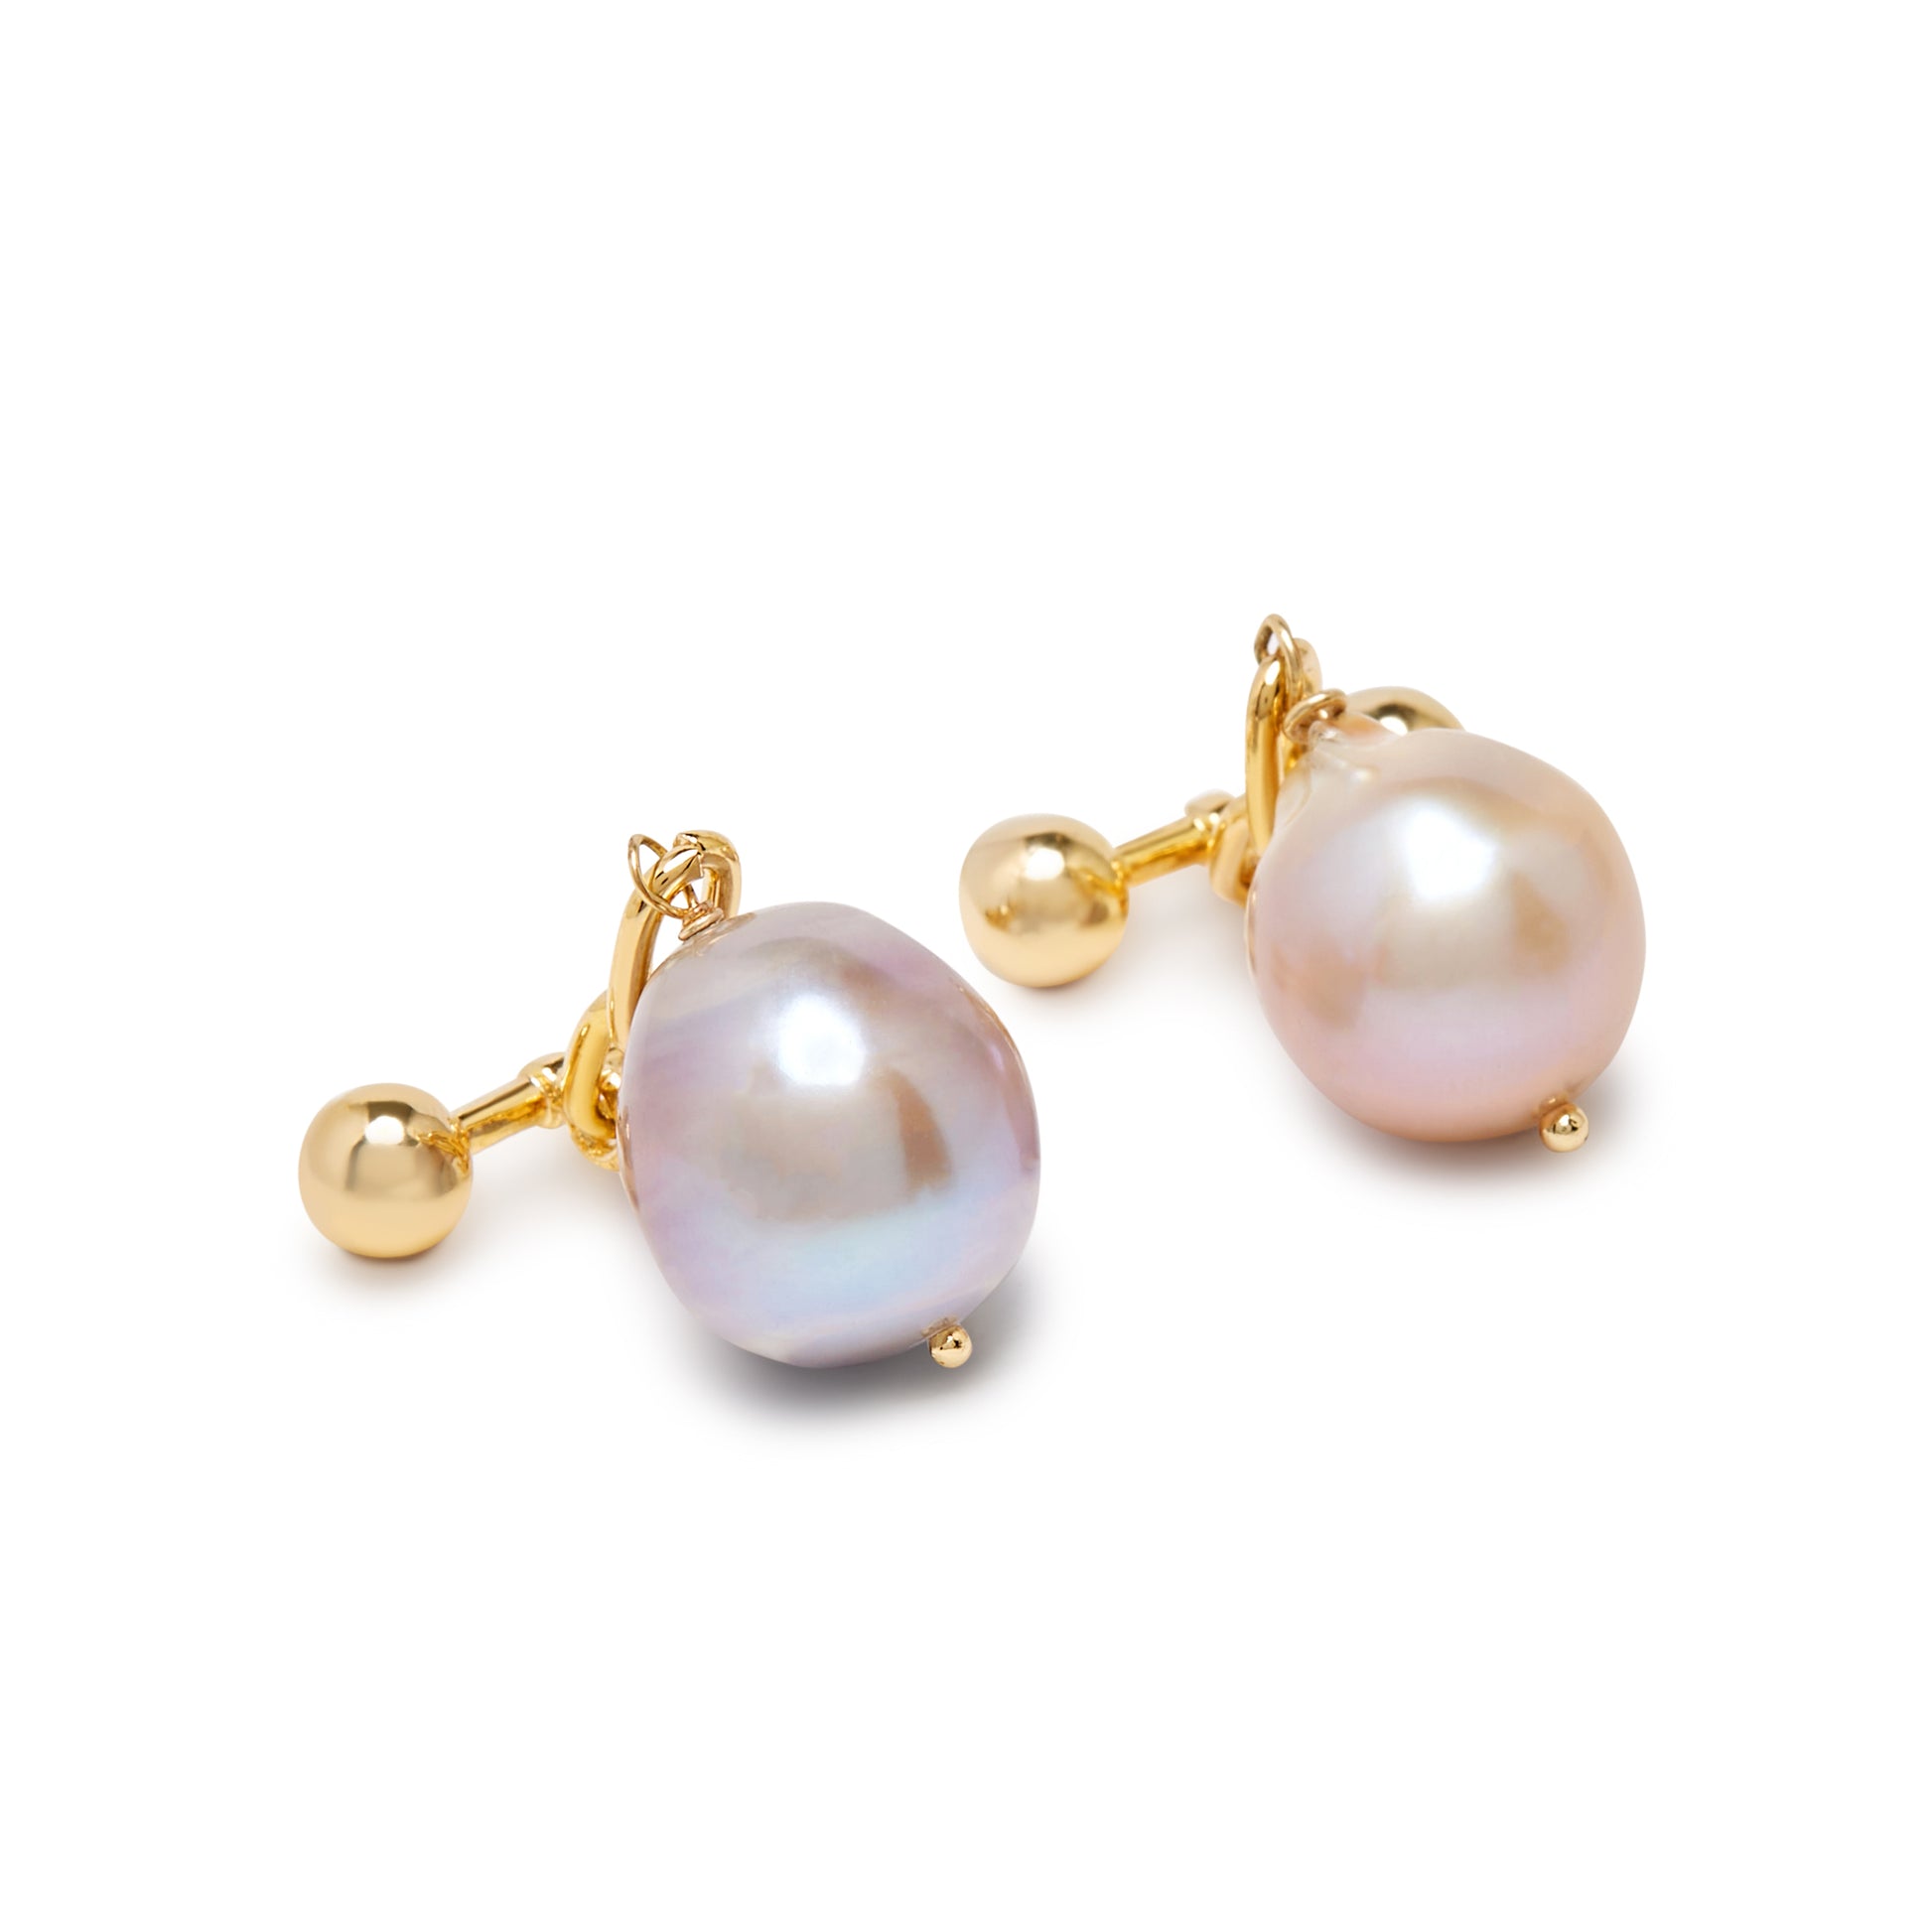 The Beethoven pink pearl cufflink